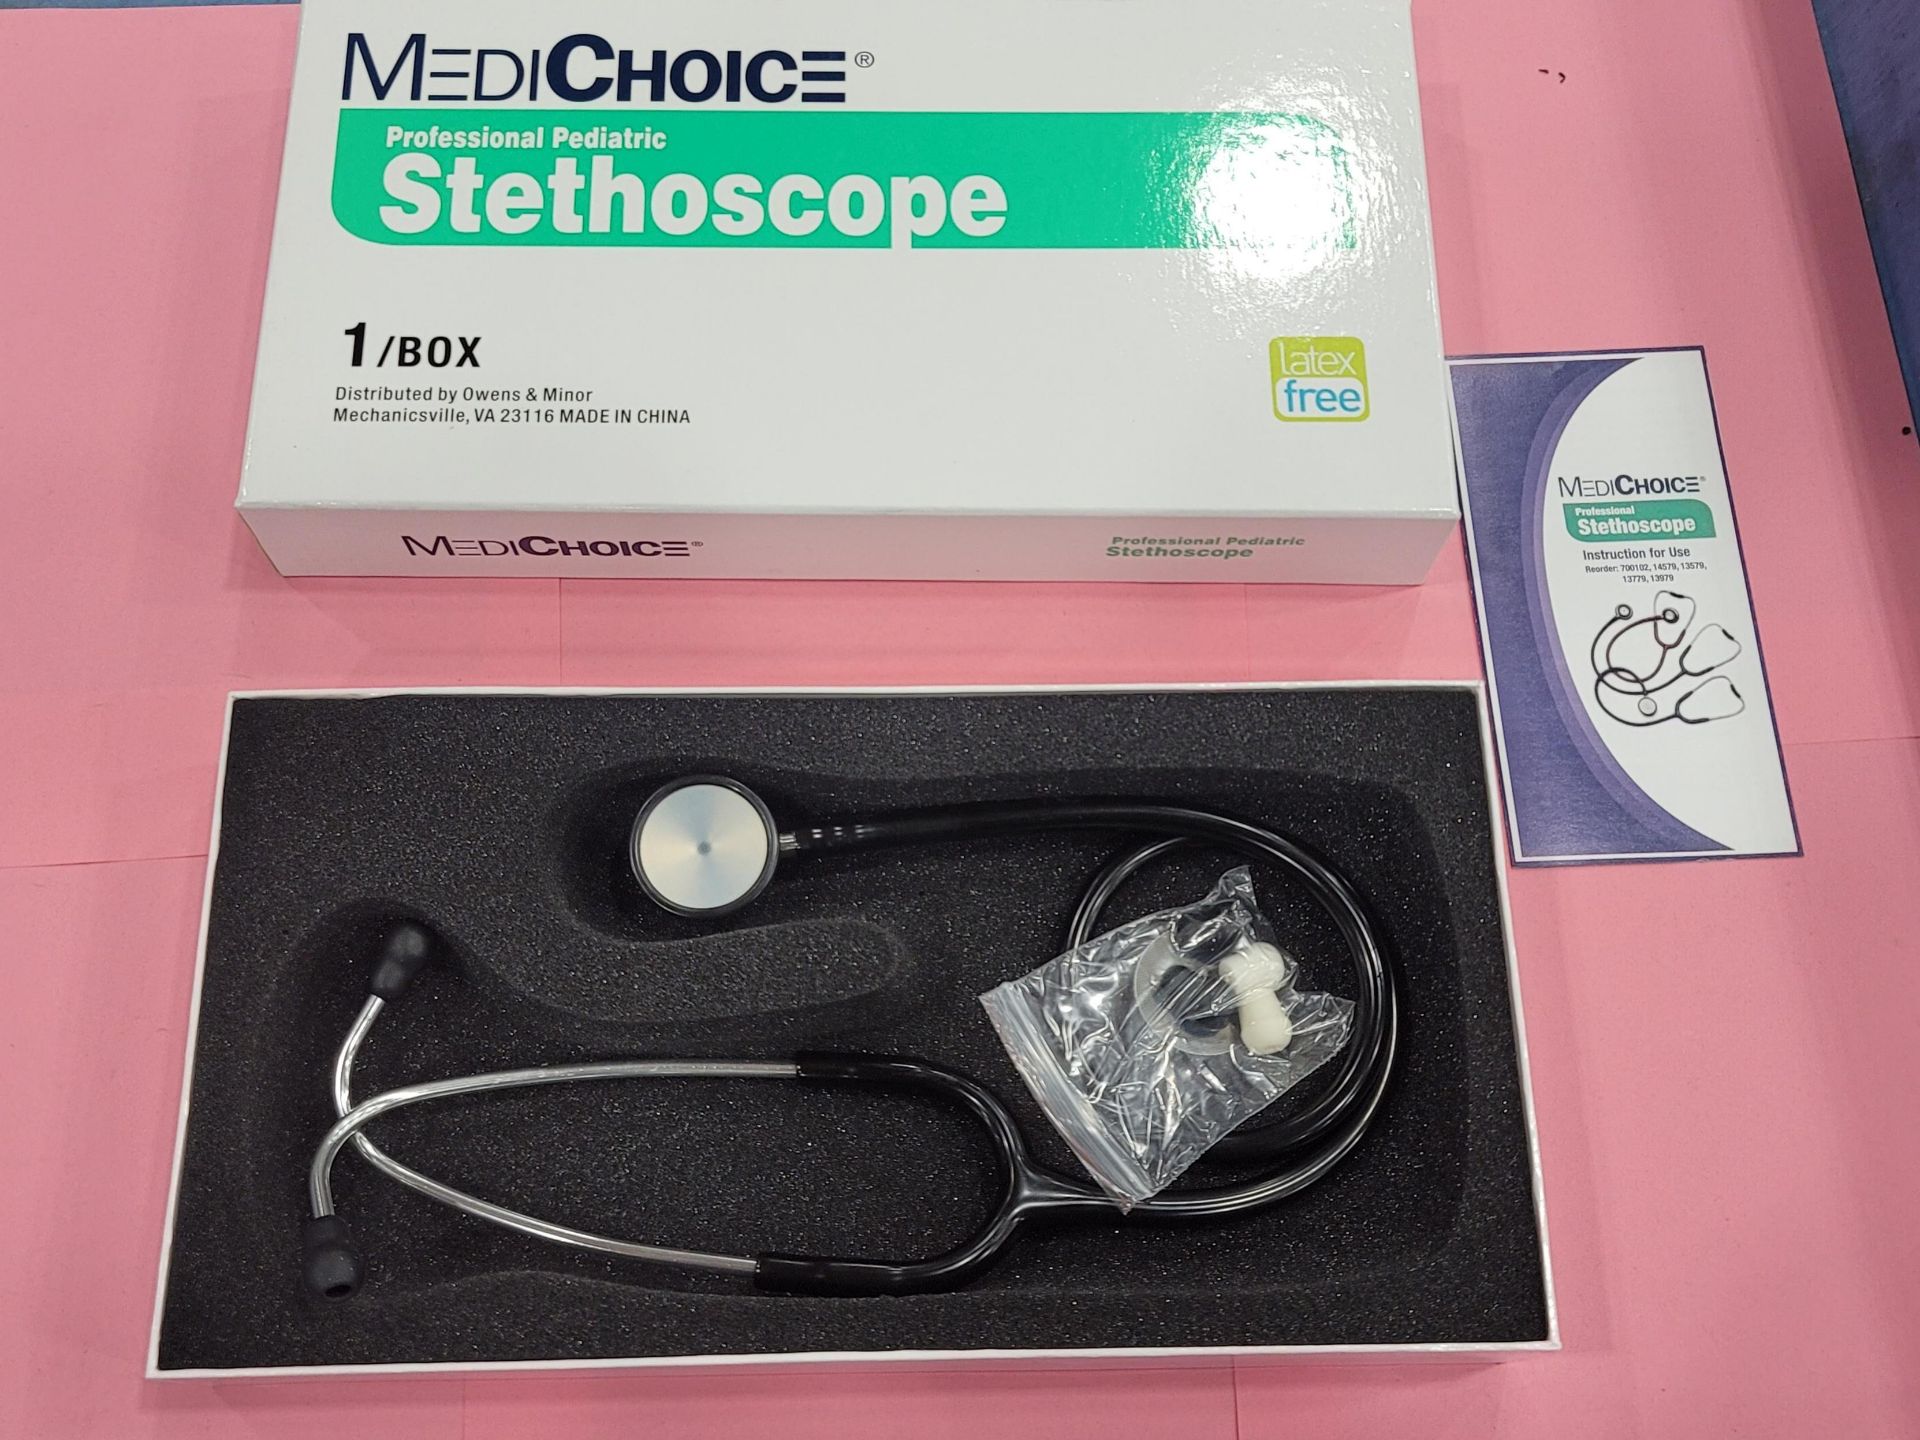 MEDICHOICE Stethoscope, 1 PALLET 78 Cases - Image 5 of 7